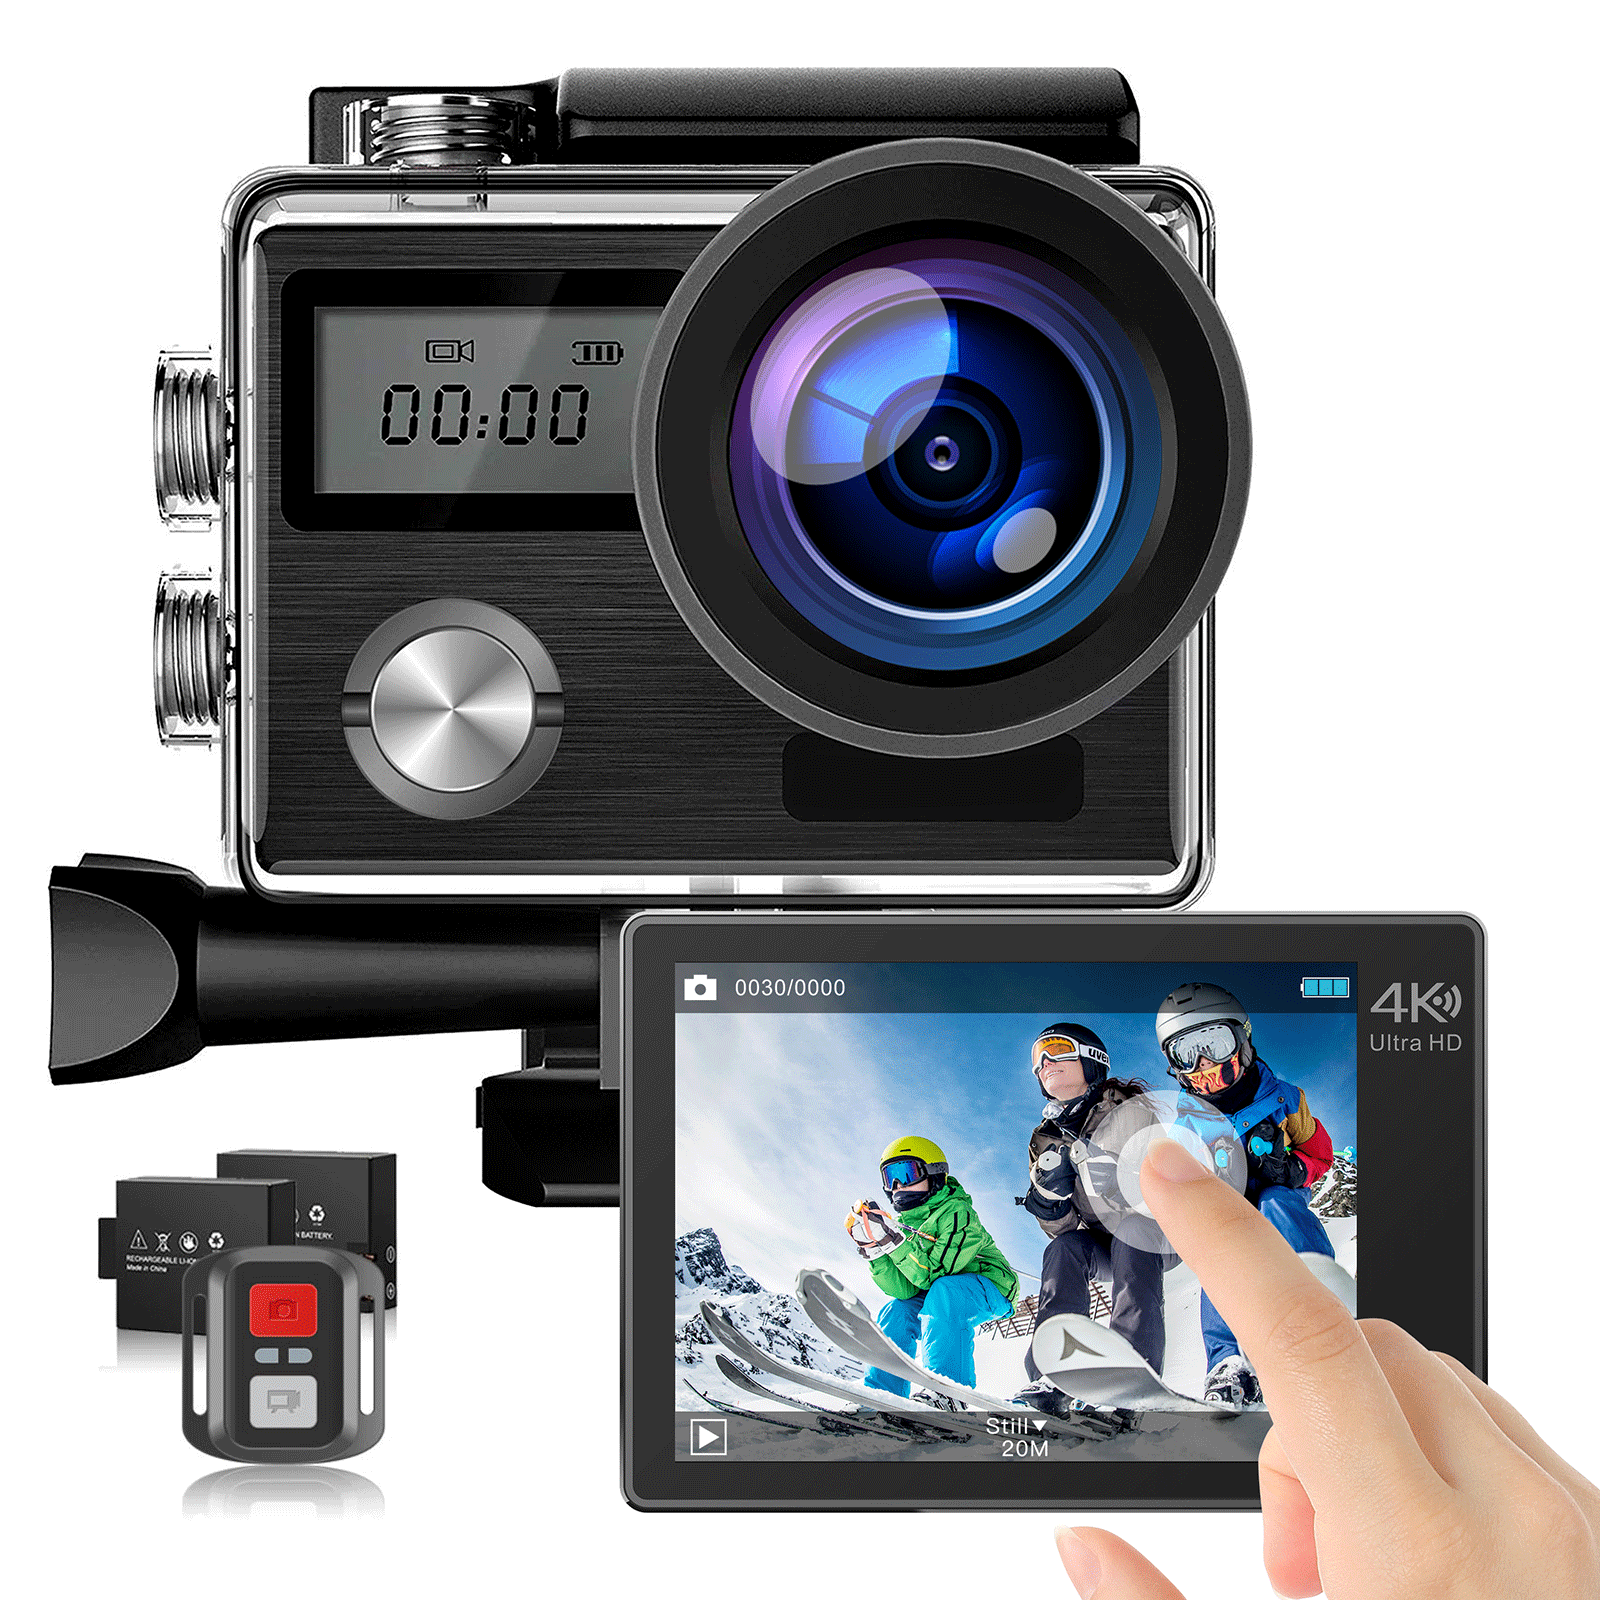  REMALI CapturePro 4K/60fps 20MP Waterproof Sports Action Camera  Kit with Carrying Case + 3 Batteries, WiFi, 2 Touch Screen, 8X Zoom,  Slow/Fast Motion, Remote/Voice Control, EIS, Distortion Correction :  Electronics